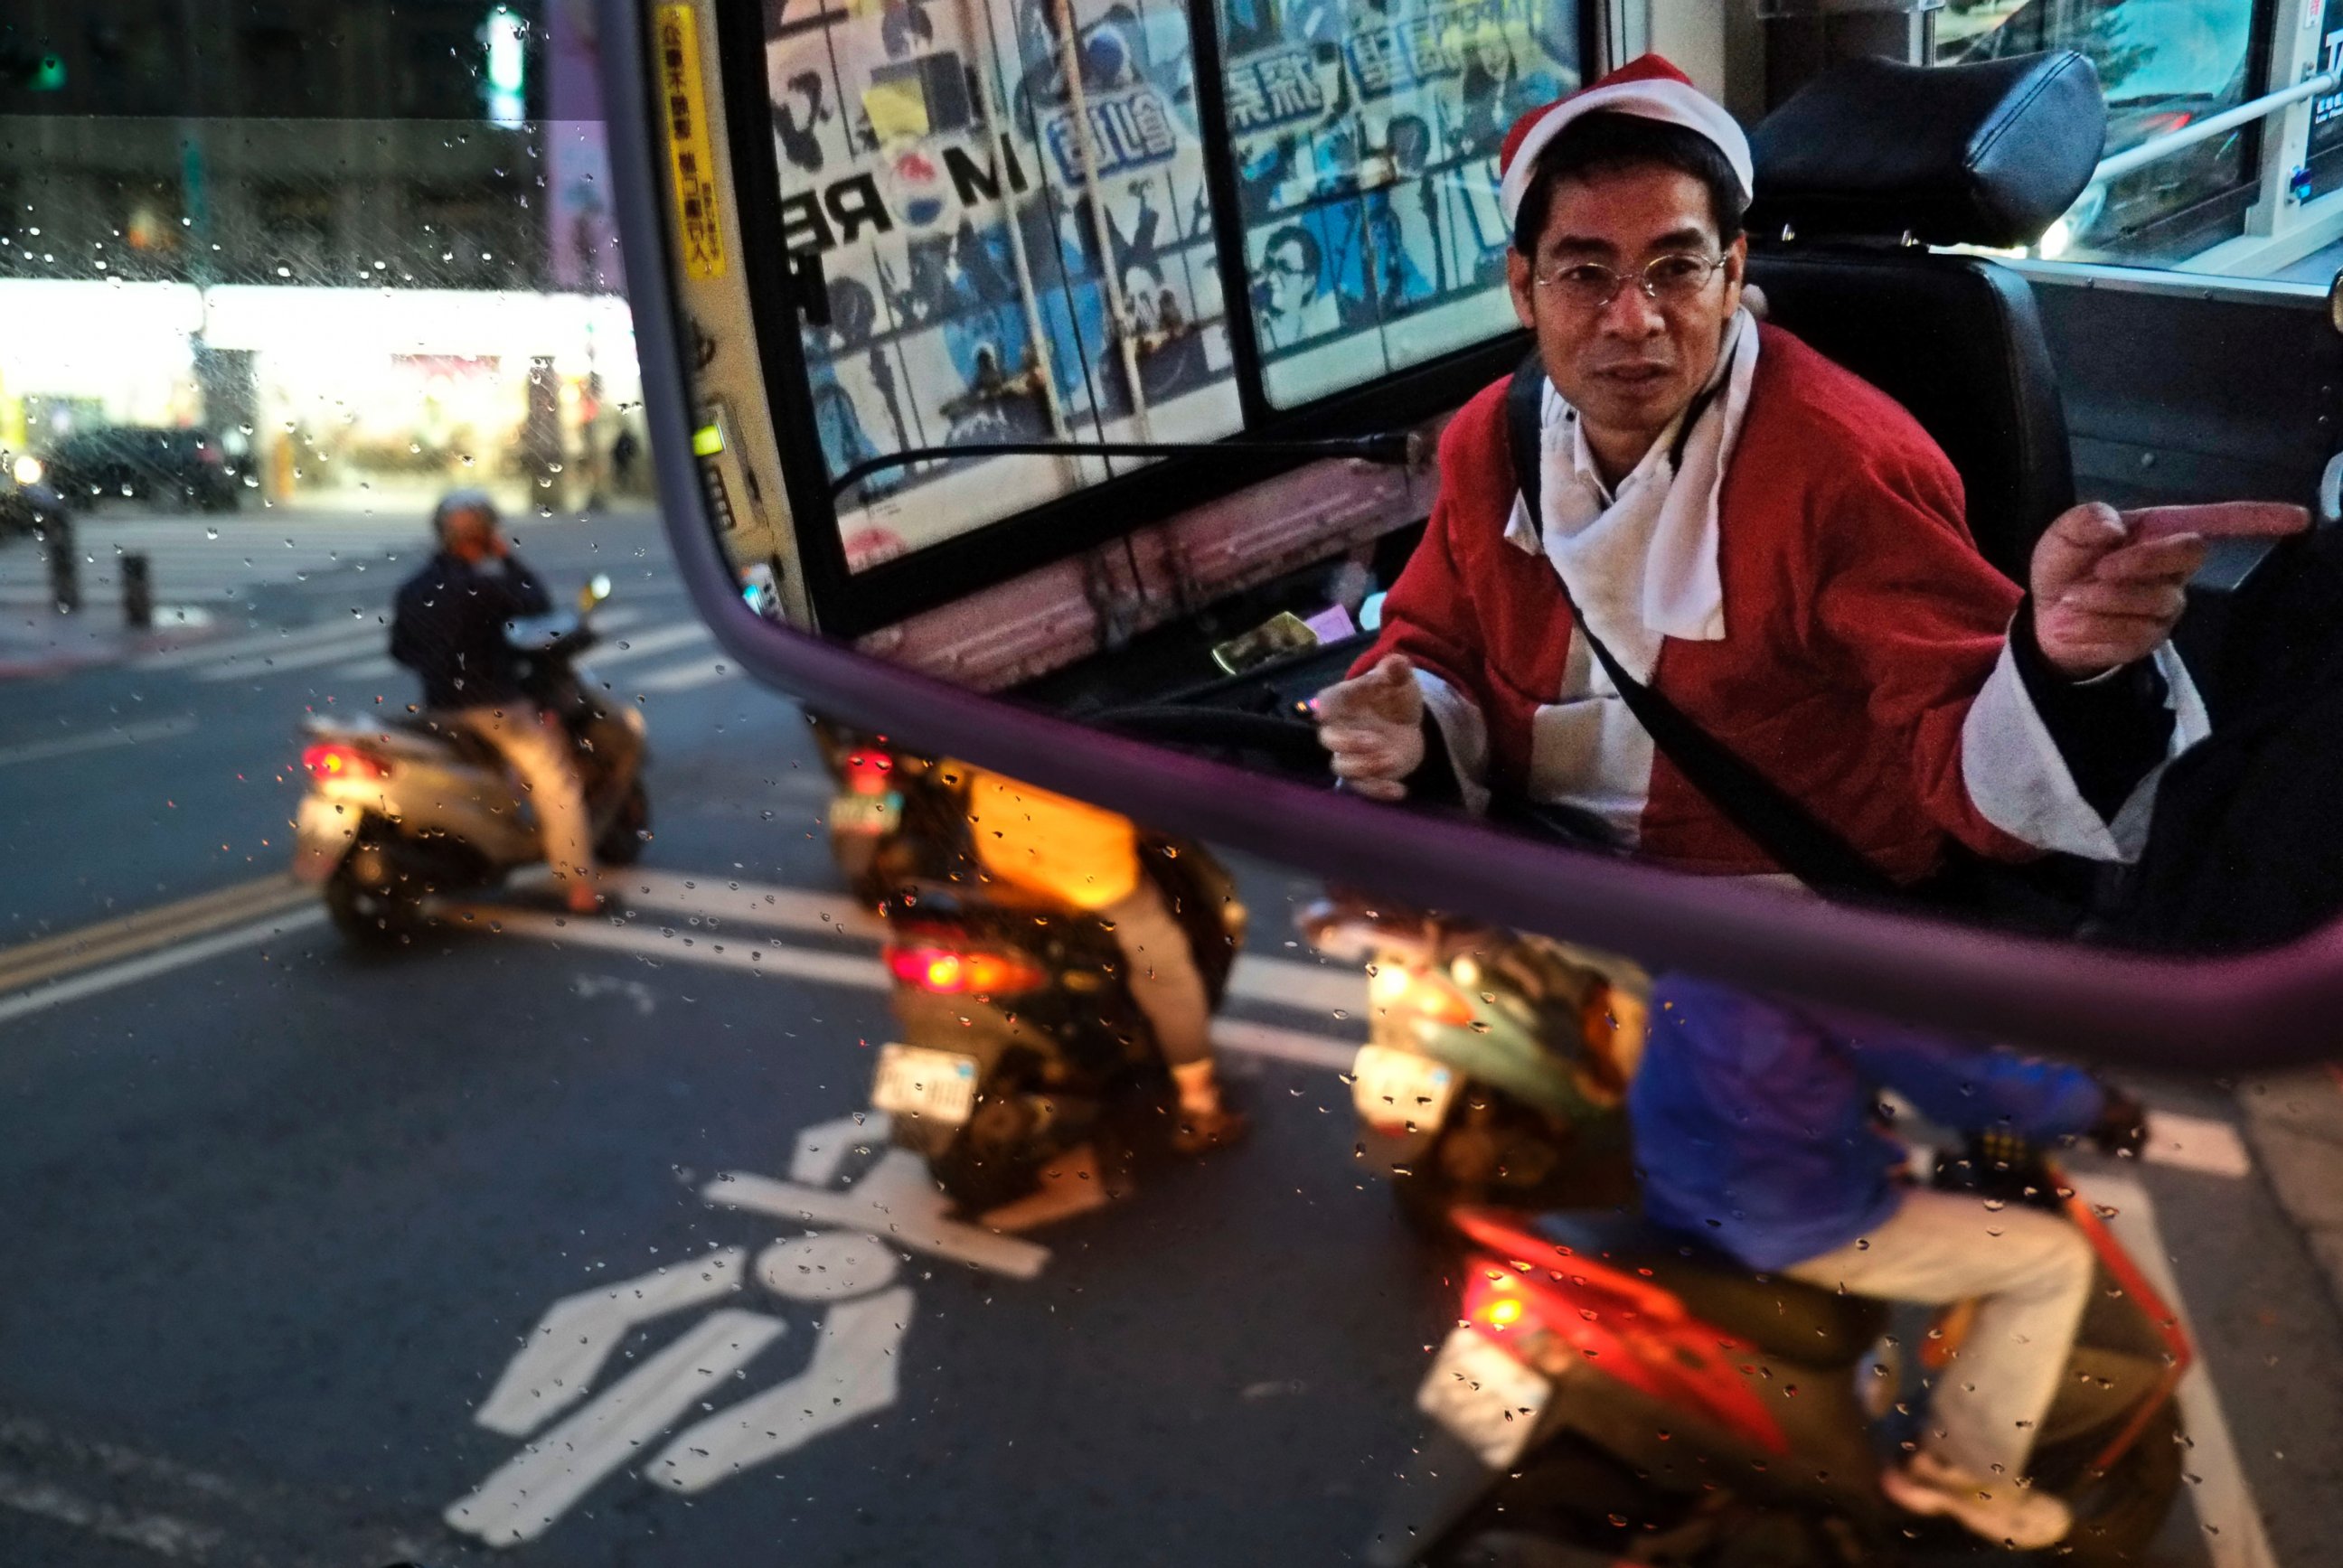 PHOTO: Reflected in a mirror, a public bus driver dressed as Santa Claus gives a passenger directions on Dec. 18, 2013, in Taipei, Taiwan.